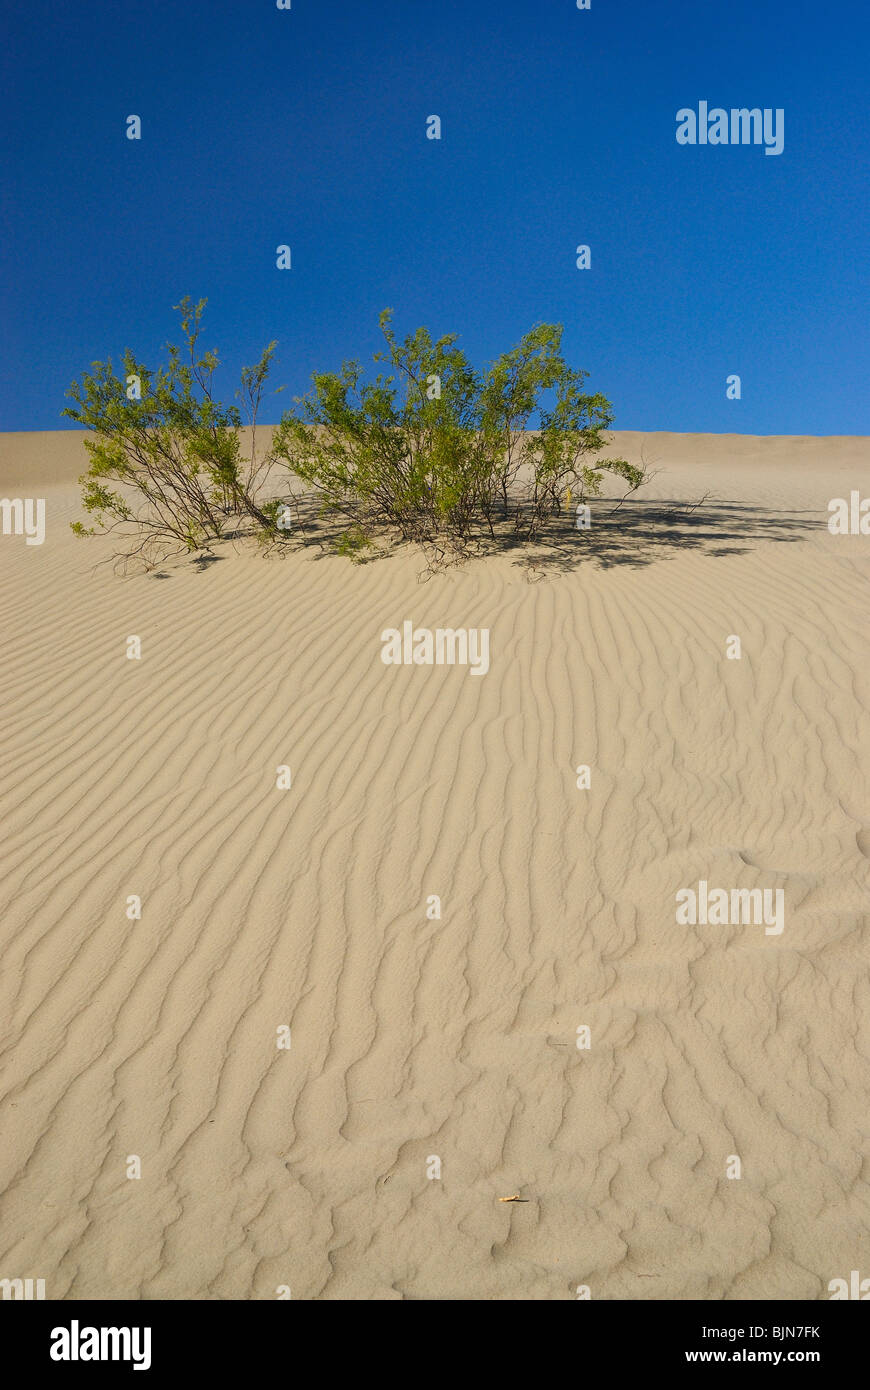 Small green trees in Mesquite Sand Dunes in Death Valley, California state Stock Photo